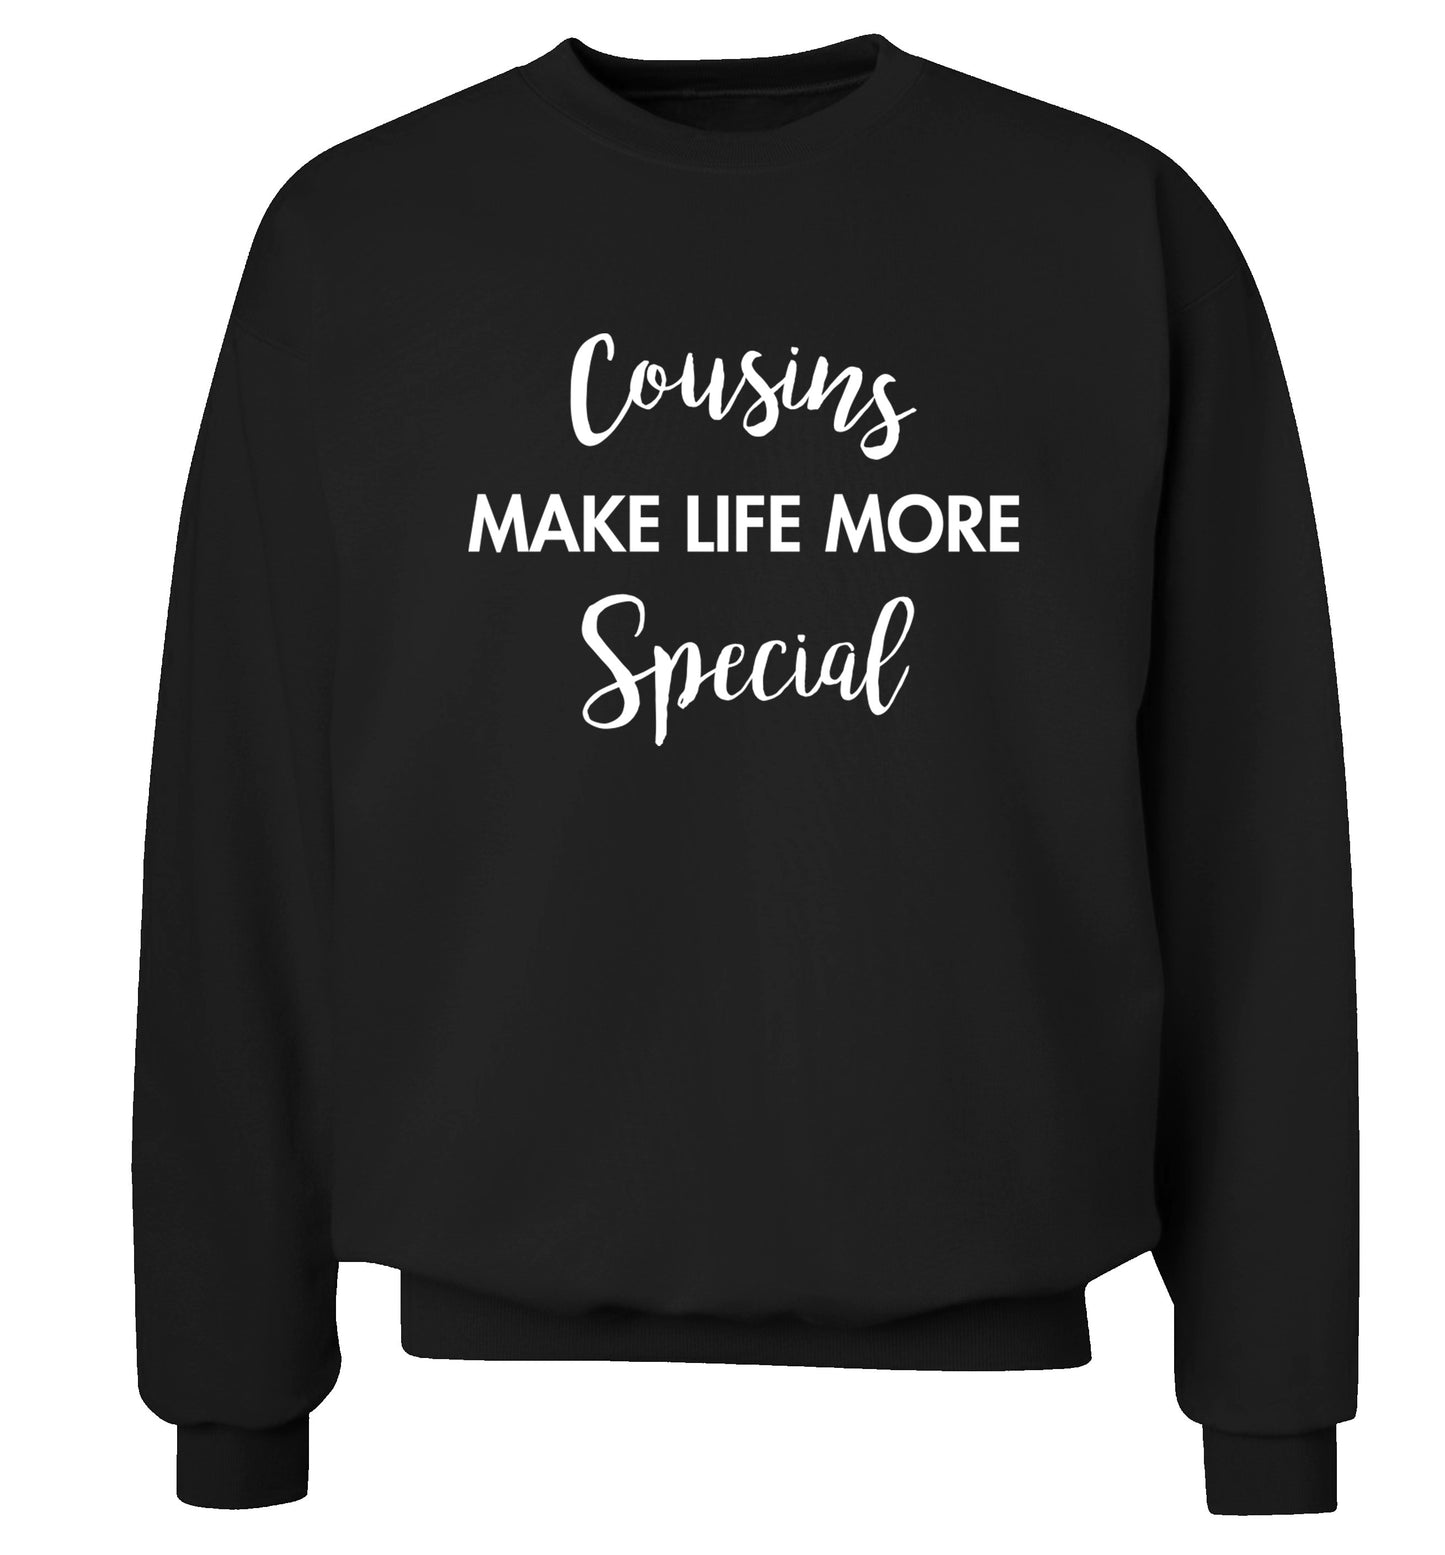 Cousins make life more special Adult's unisex black Sweater 2XL